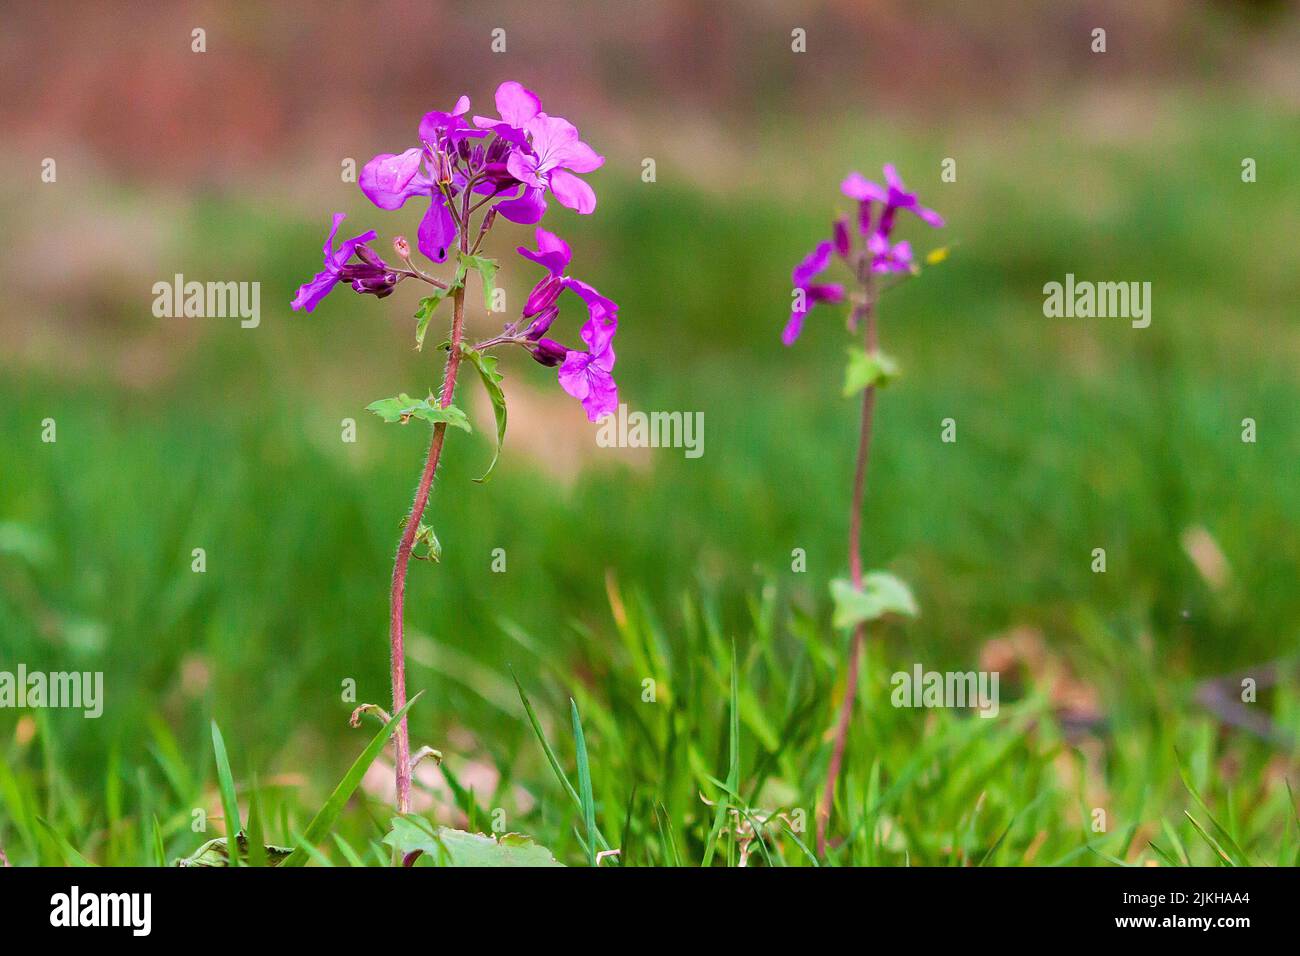 A closeup of a purple Annual honesty (Lunaria annua) wild flower growing in the field Stock Photo